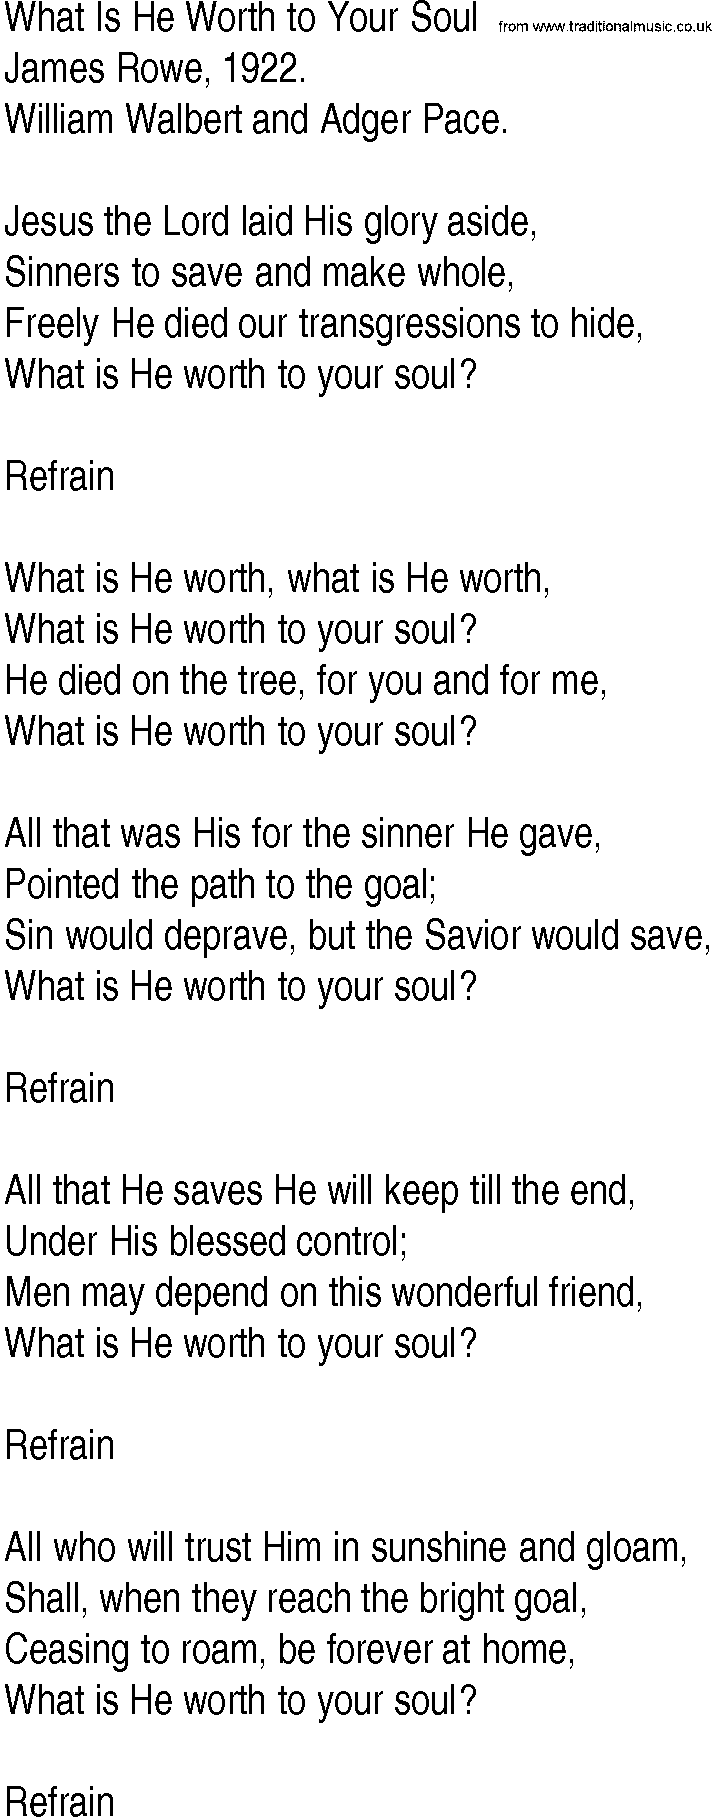 Hymn and Gospel Song: What Is He Worth to Your Soul by James Rowe lyrics